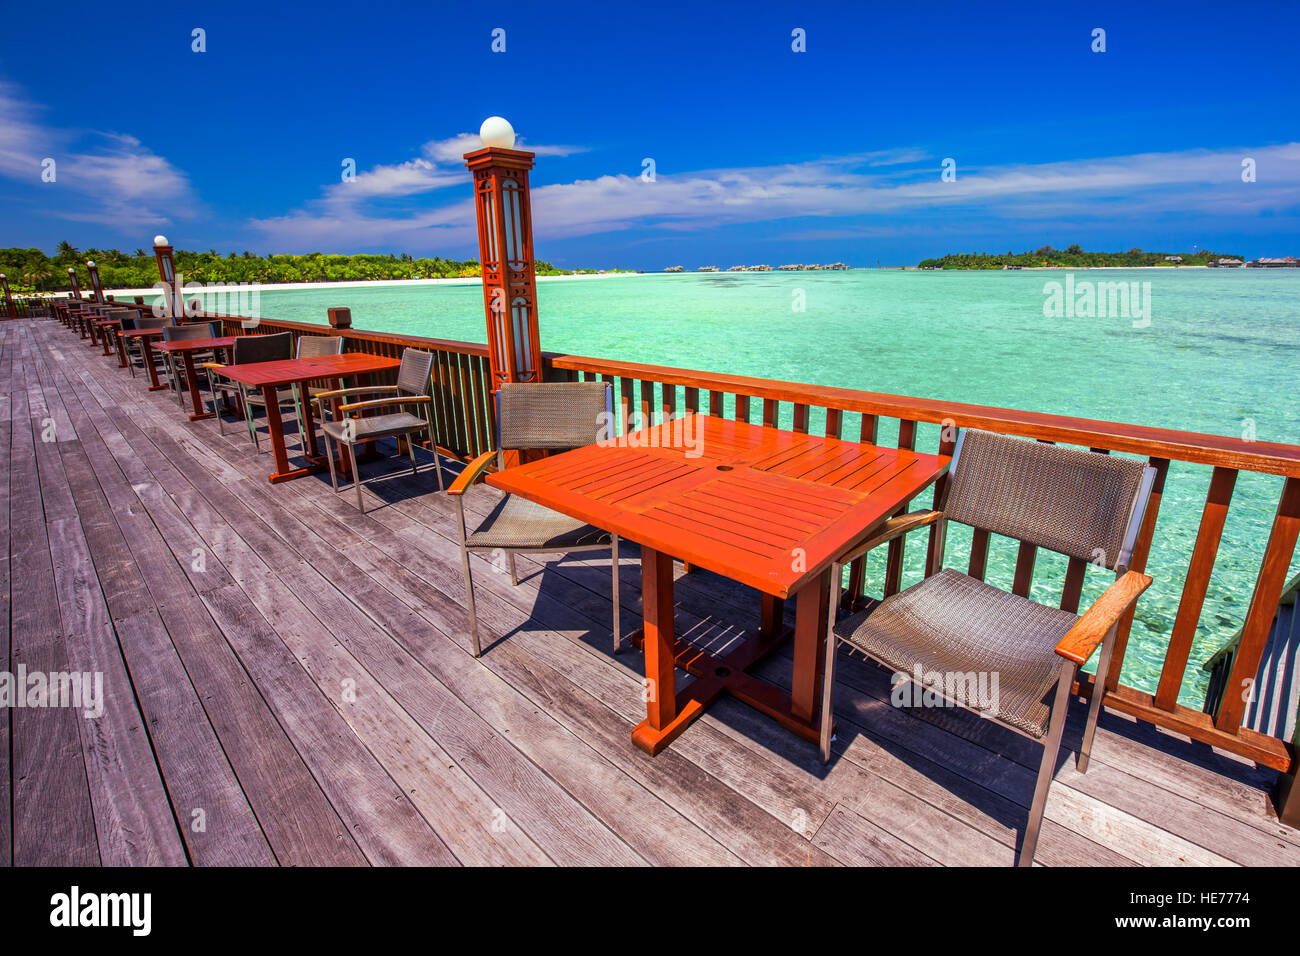 Chairs and tables with palm trees, water bungalows and clear water on luxurious tropical beach resort. Stock Photo